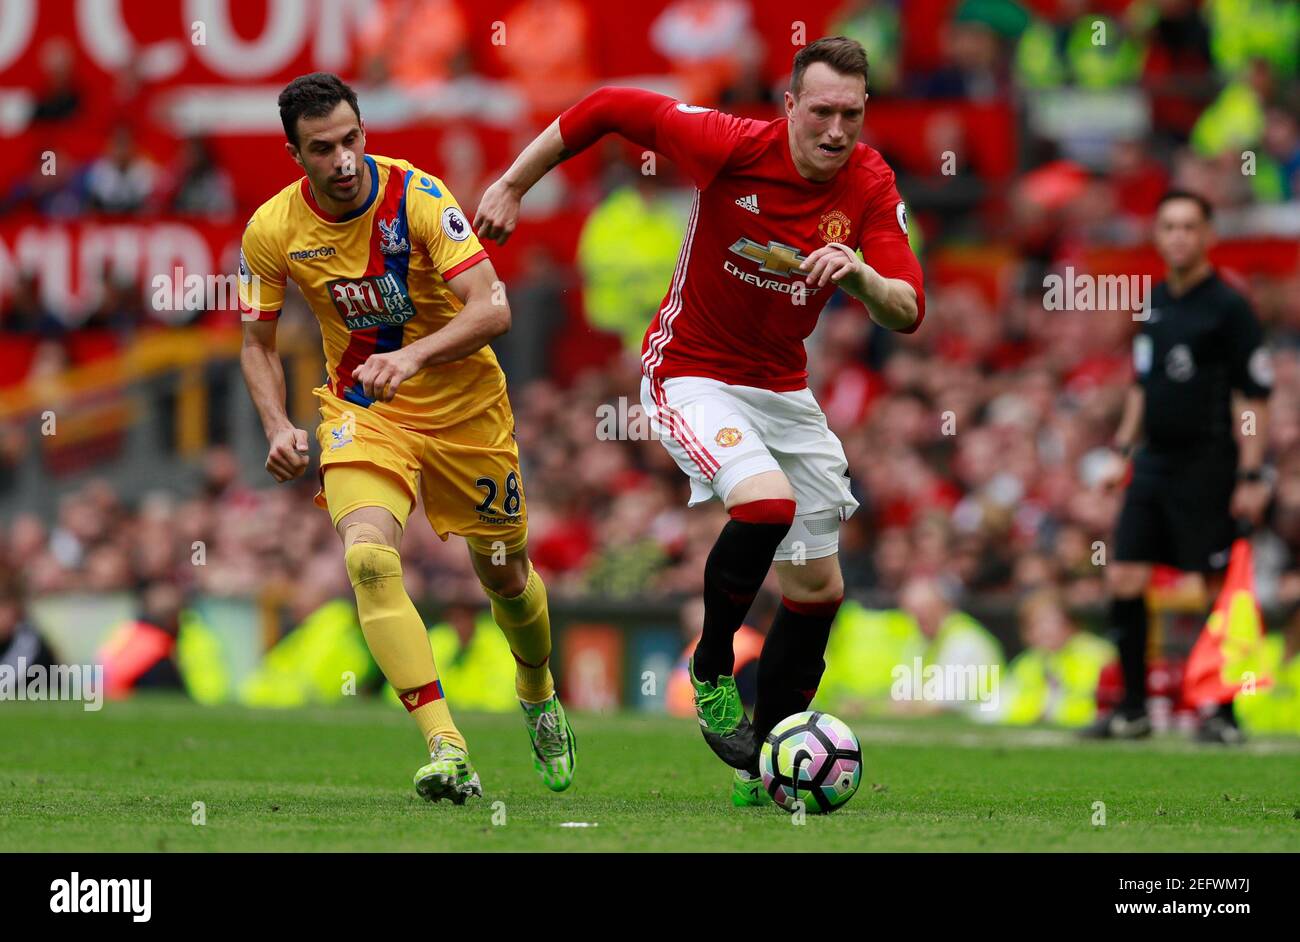 Britain Football Soccer - Manchester United v Crystal Palace - Premier League - Old Trafford - 21/5/17 Crystal Palace's Luka Milivojevic in action with Manchester United's Phil Jones  Action Images via Reuters / Jason Cairnduff Livepic EDITORIAL USE ONLY. No use with unauthorized audio, video, data, fixture lists, club/league logos or 'live' services. Online in-match use limited to 45 images, no video emulation. No use in betting, games or single club/league/player publications.  Please contact your account representative for further details. Stock Photo